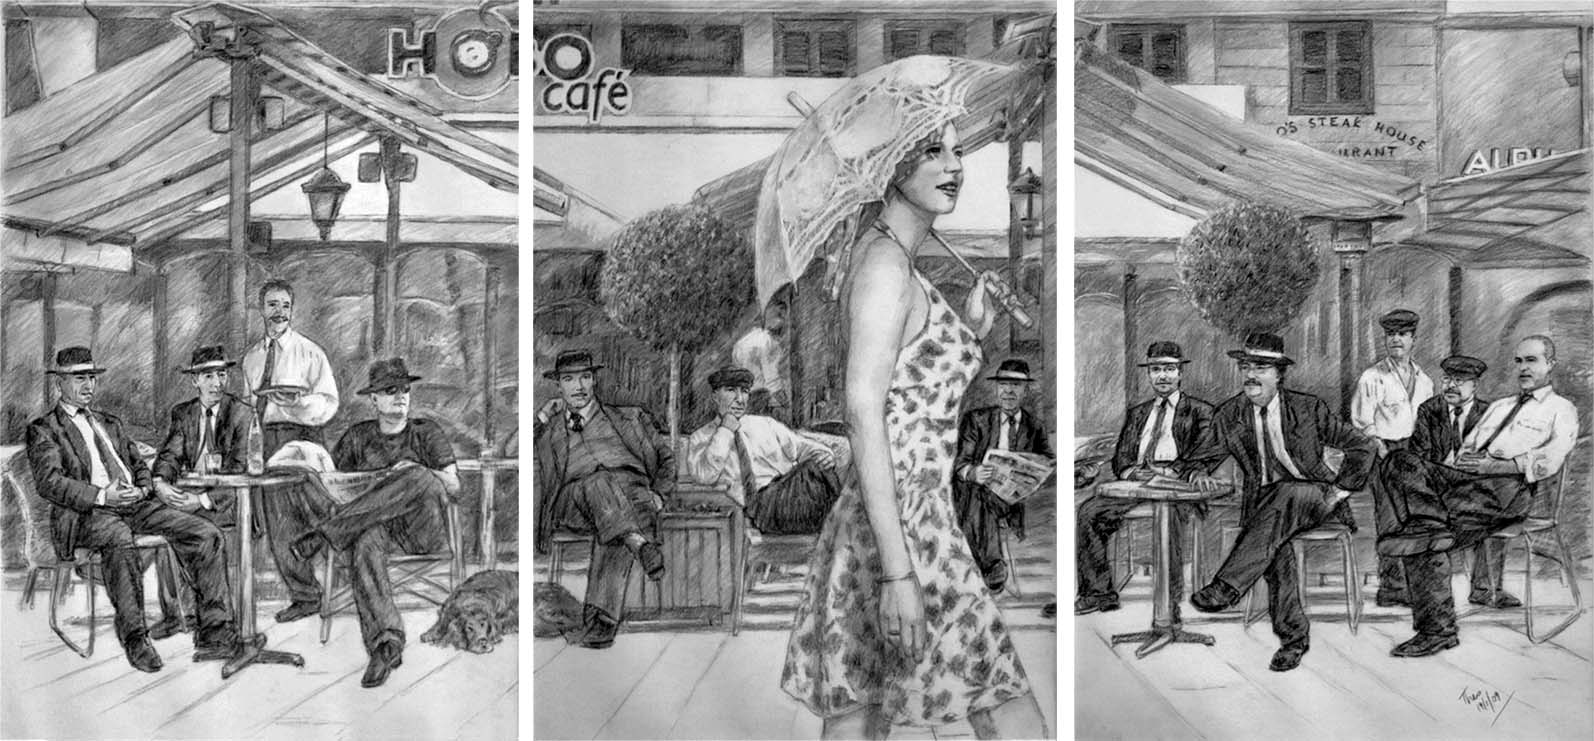 pencil drawing of a cafe in cyprus larnaca by Theo Michael title Hobo's Cafe